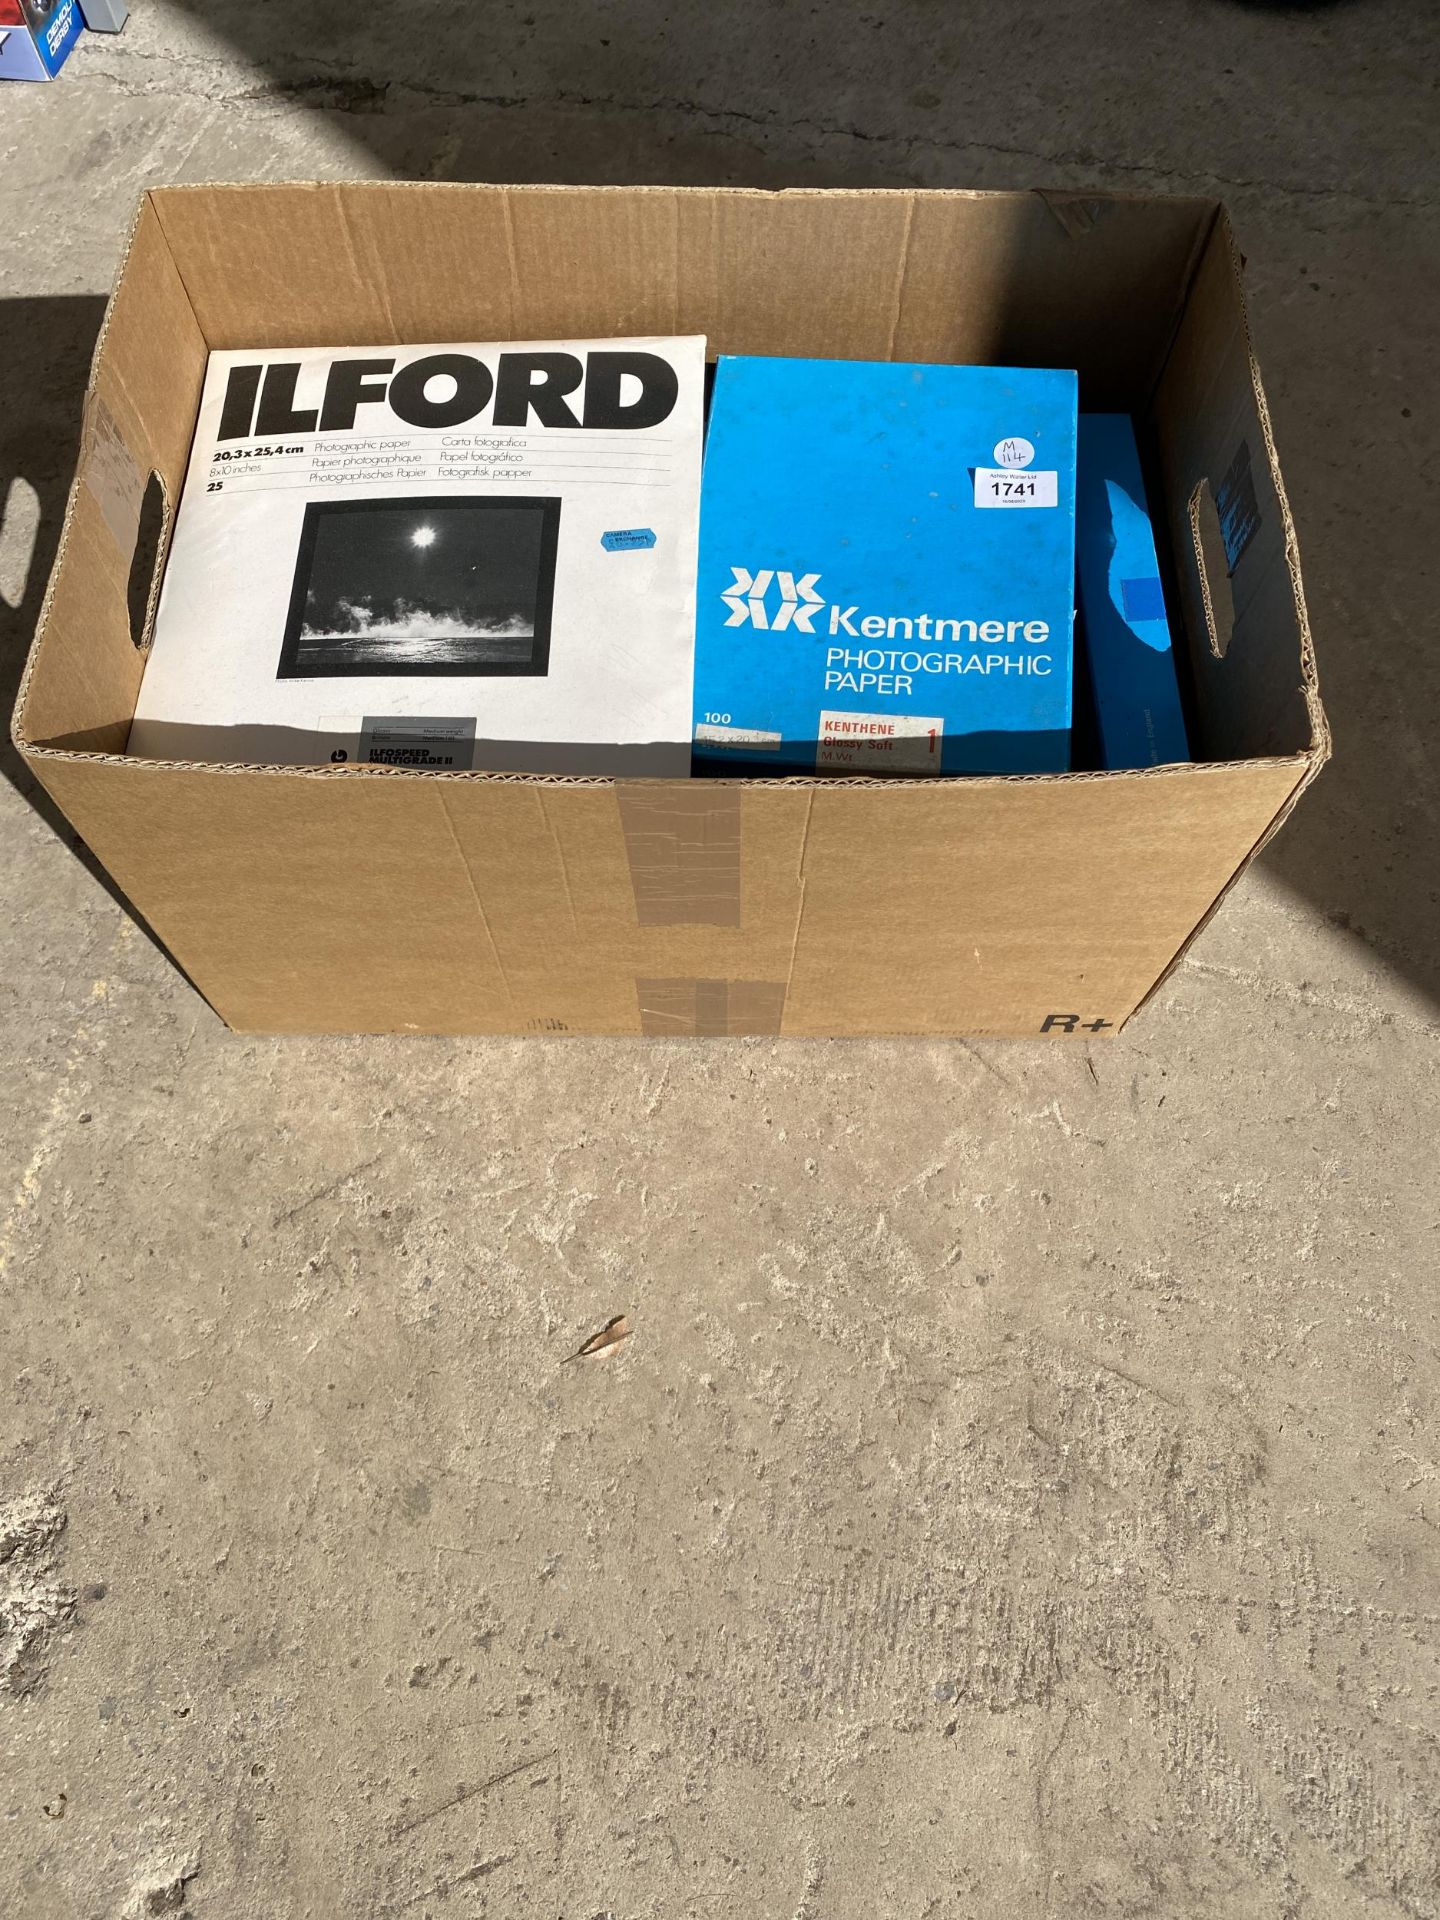 A BOX OF ILFORD AND FURTHER BOXED PHOTO PAPER - Image 2 of 3